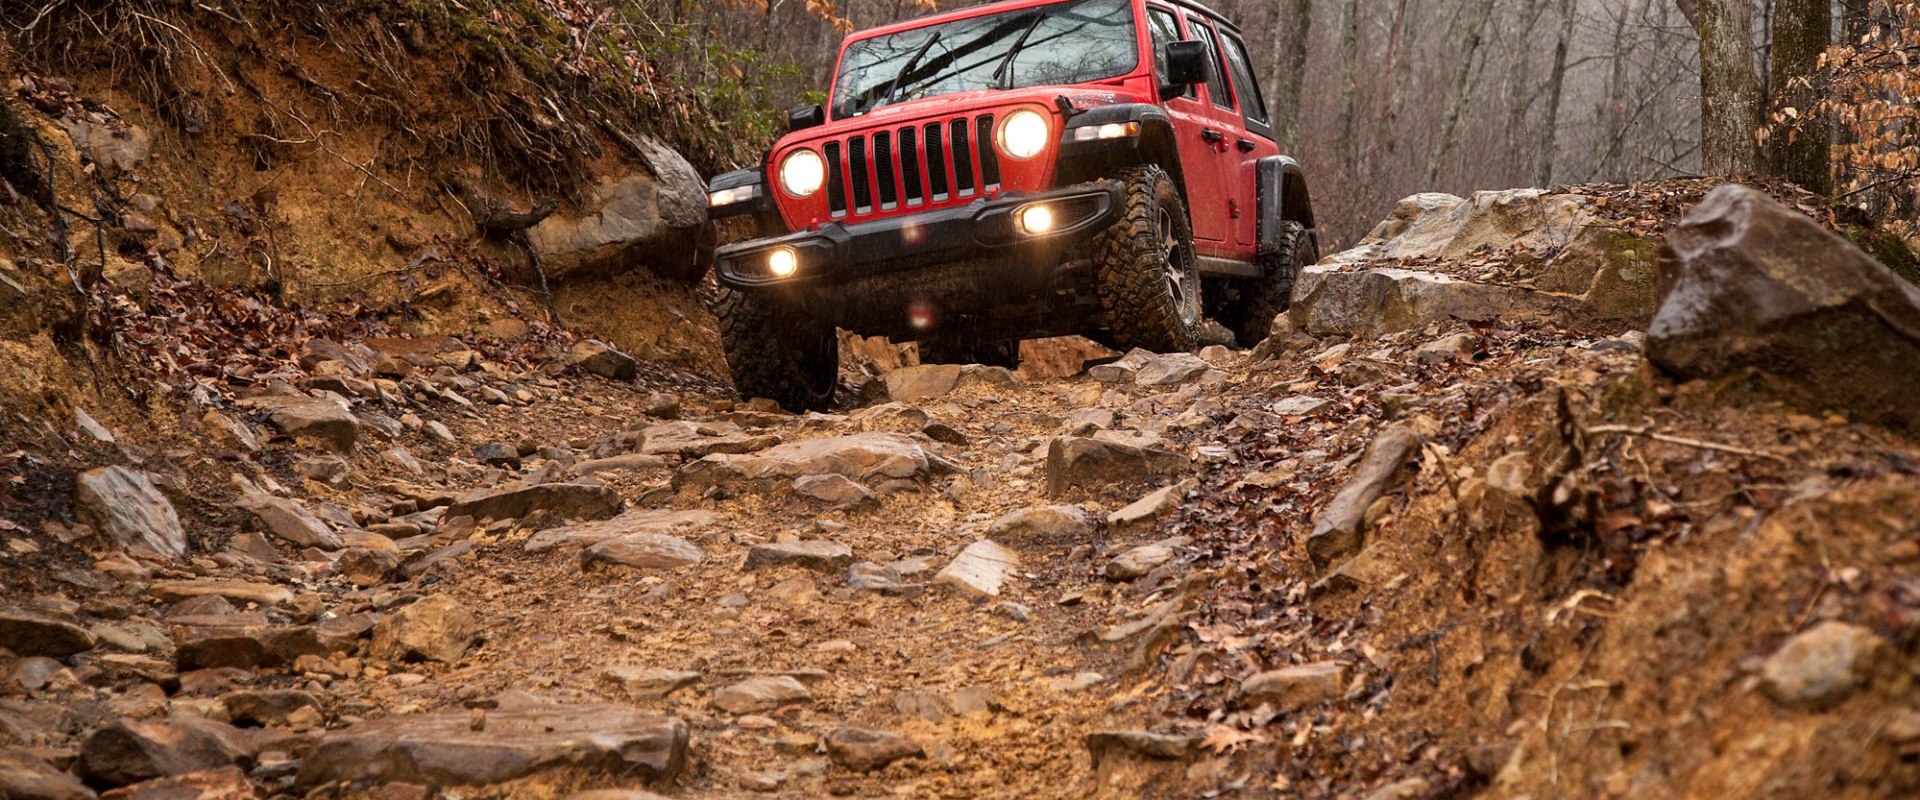 How to Contact an Offroad Park in New York Before Visiting